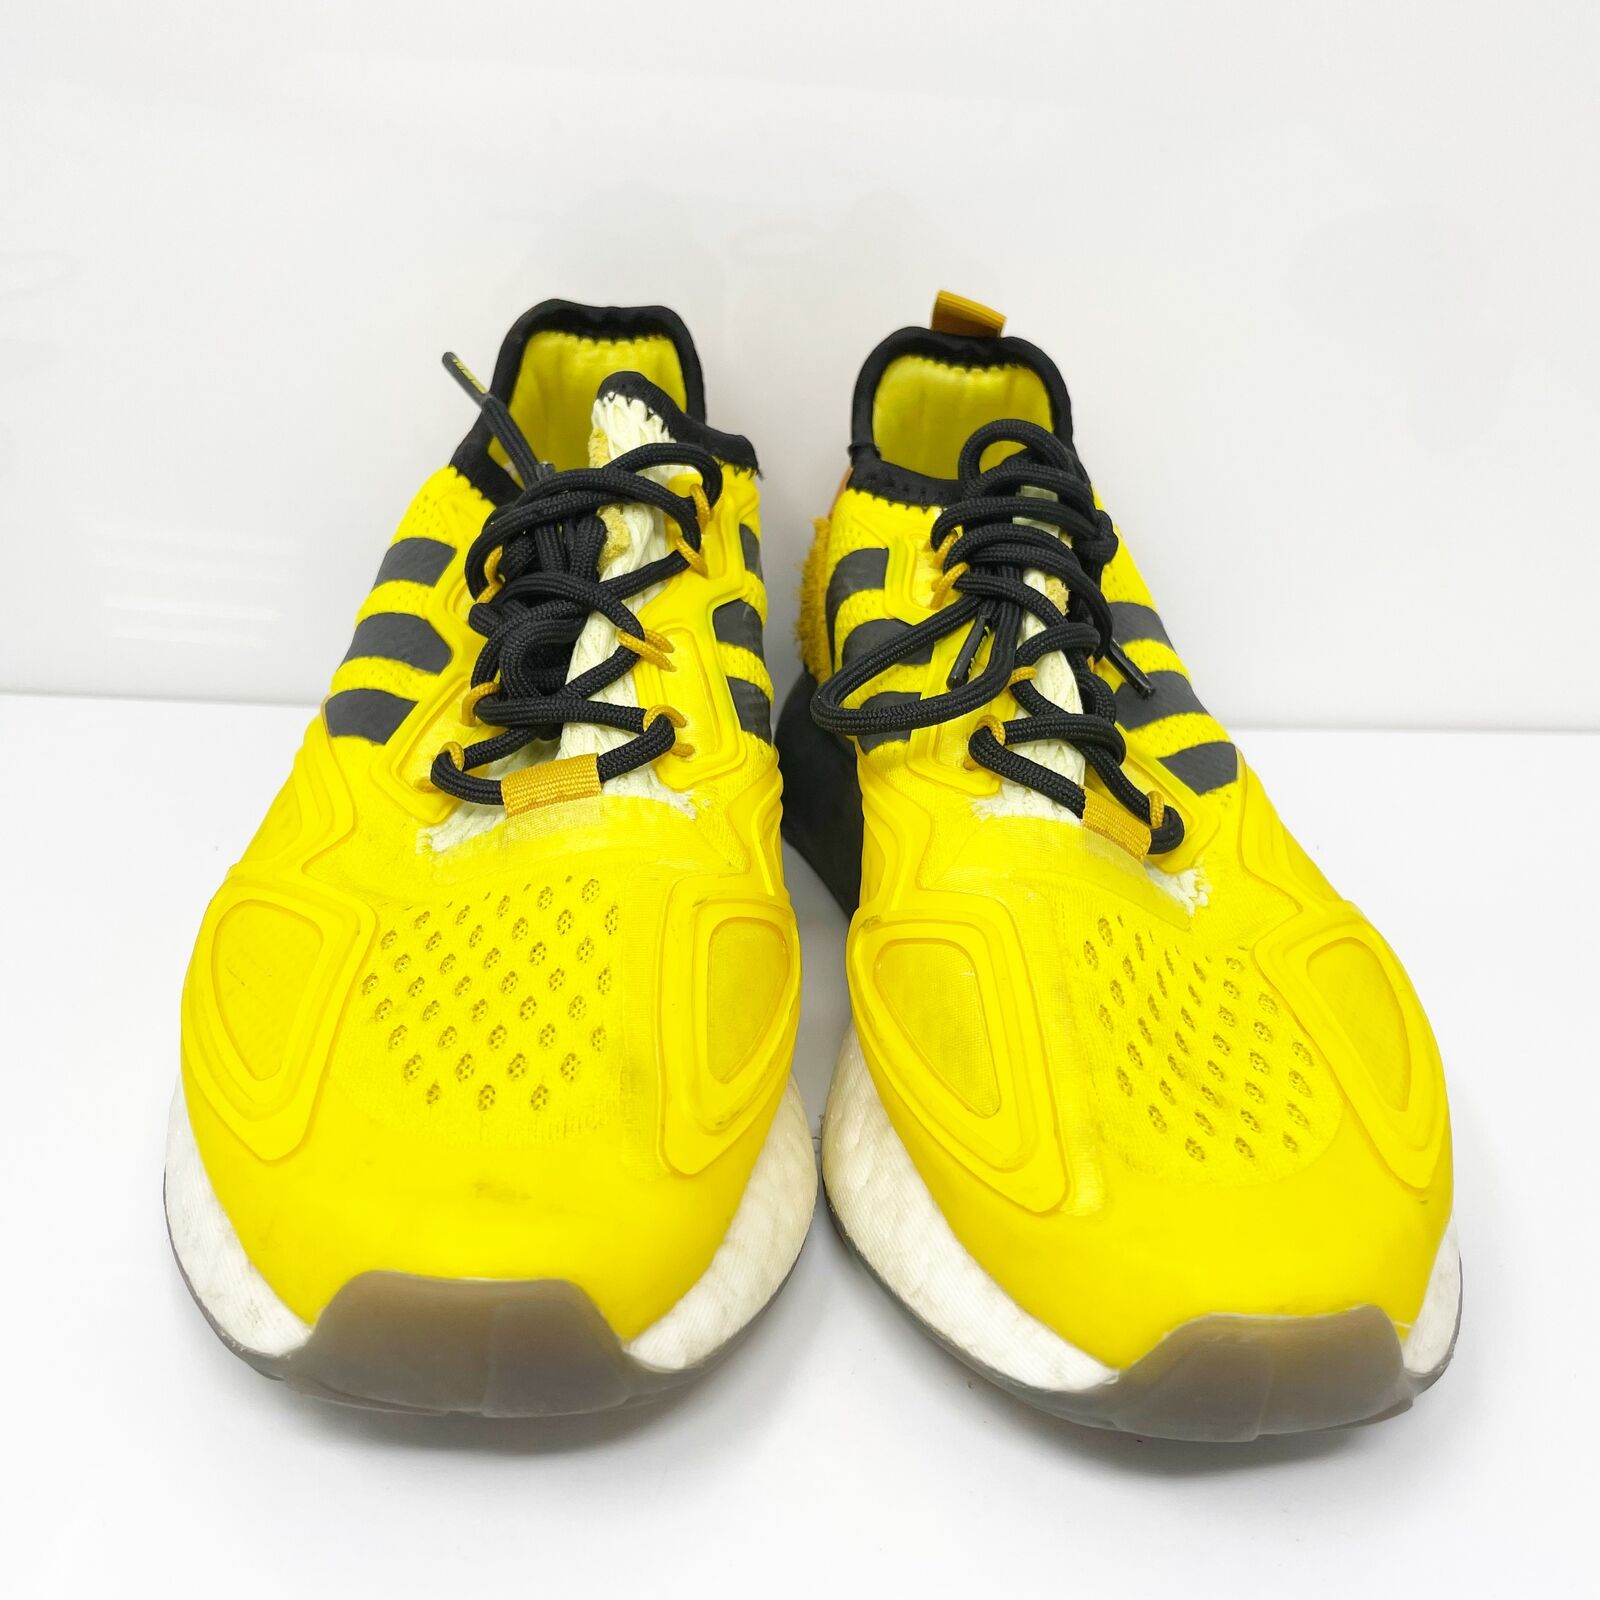 Adidas Mens Ninja ZX 2K Boost FZ1887 Yellow Running Shoes Sneakers Size 5